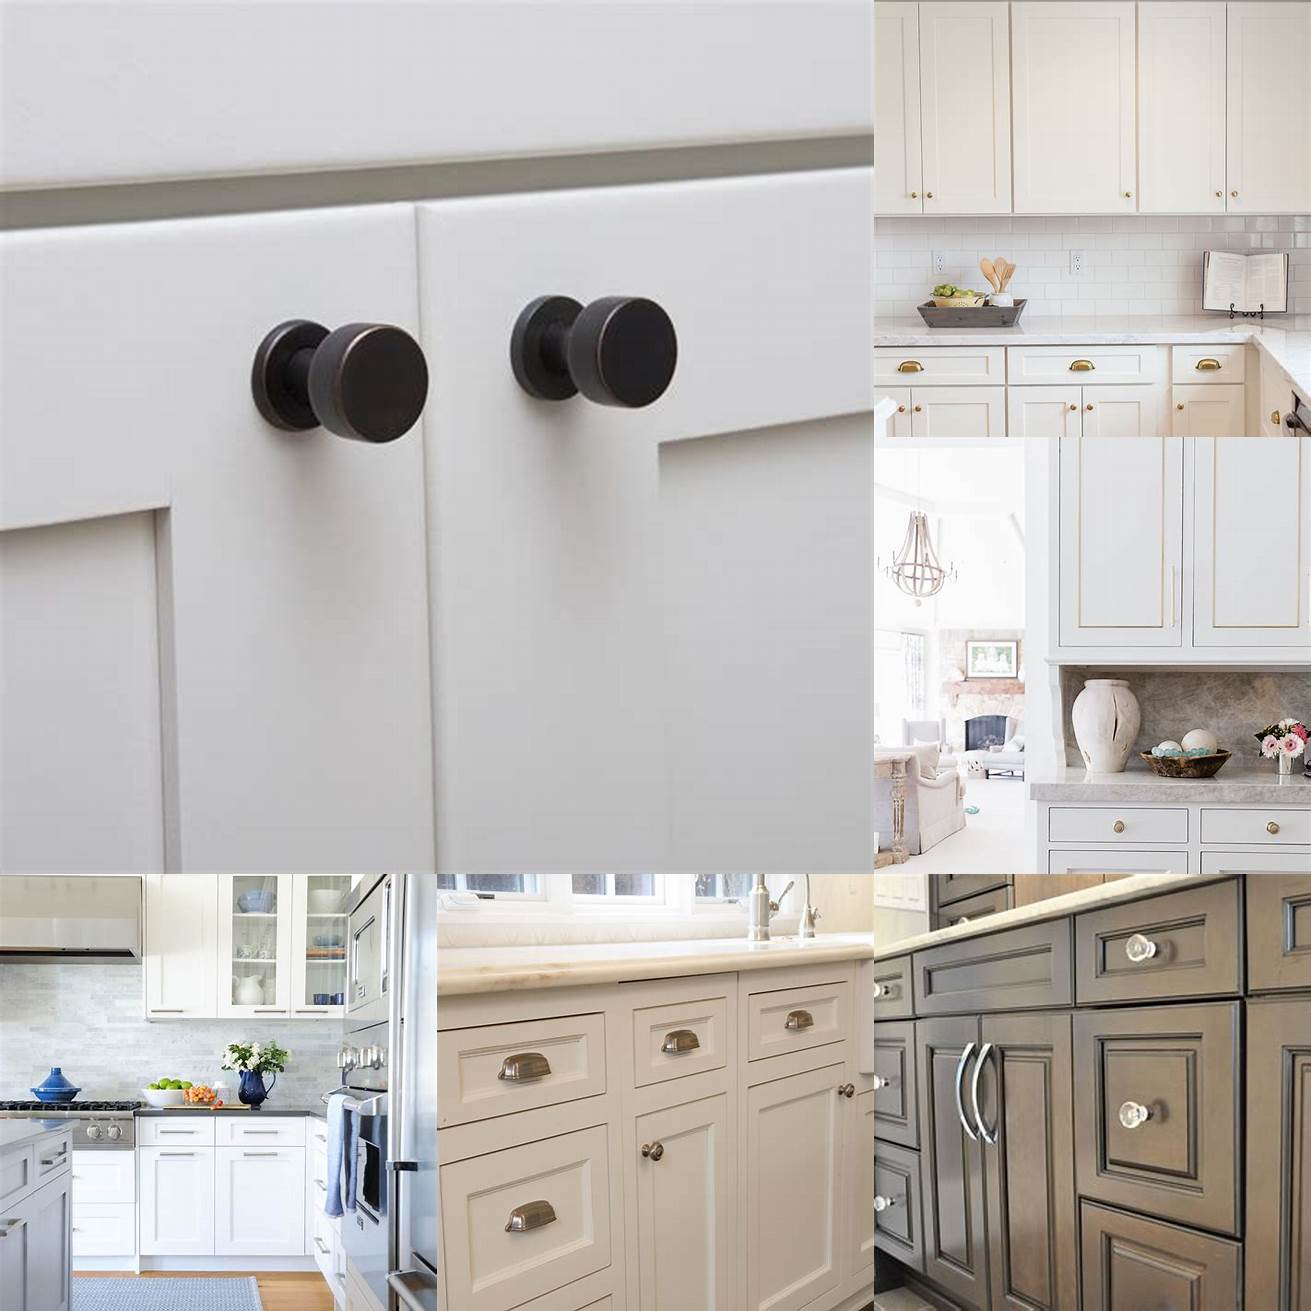 White Knobs For a clean and classic look consider white knobs on white cabinets This is a simple and affordable update that can make a big impact